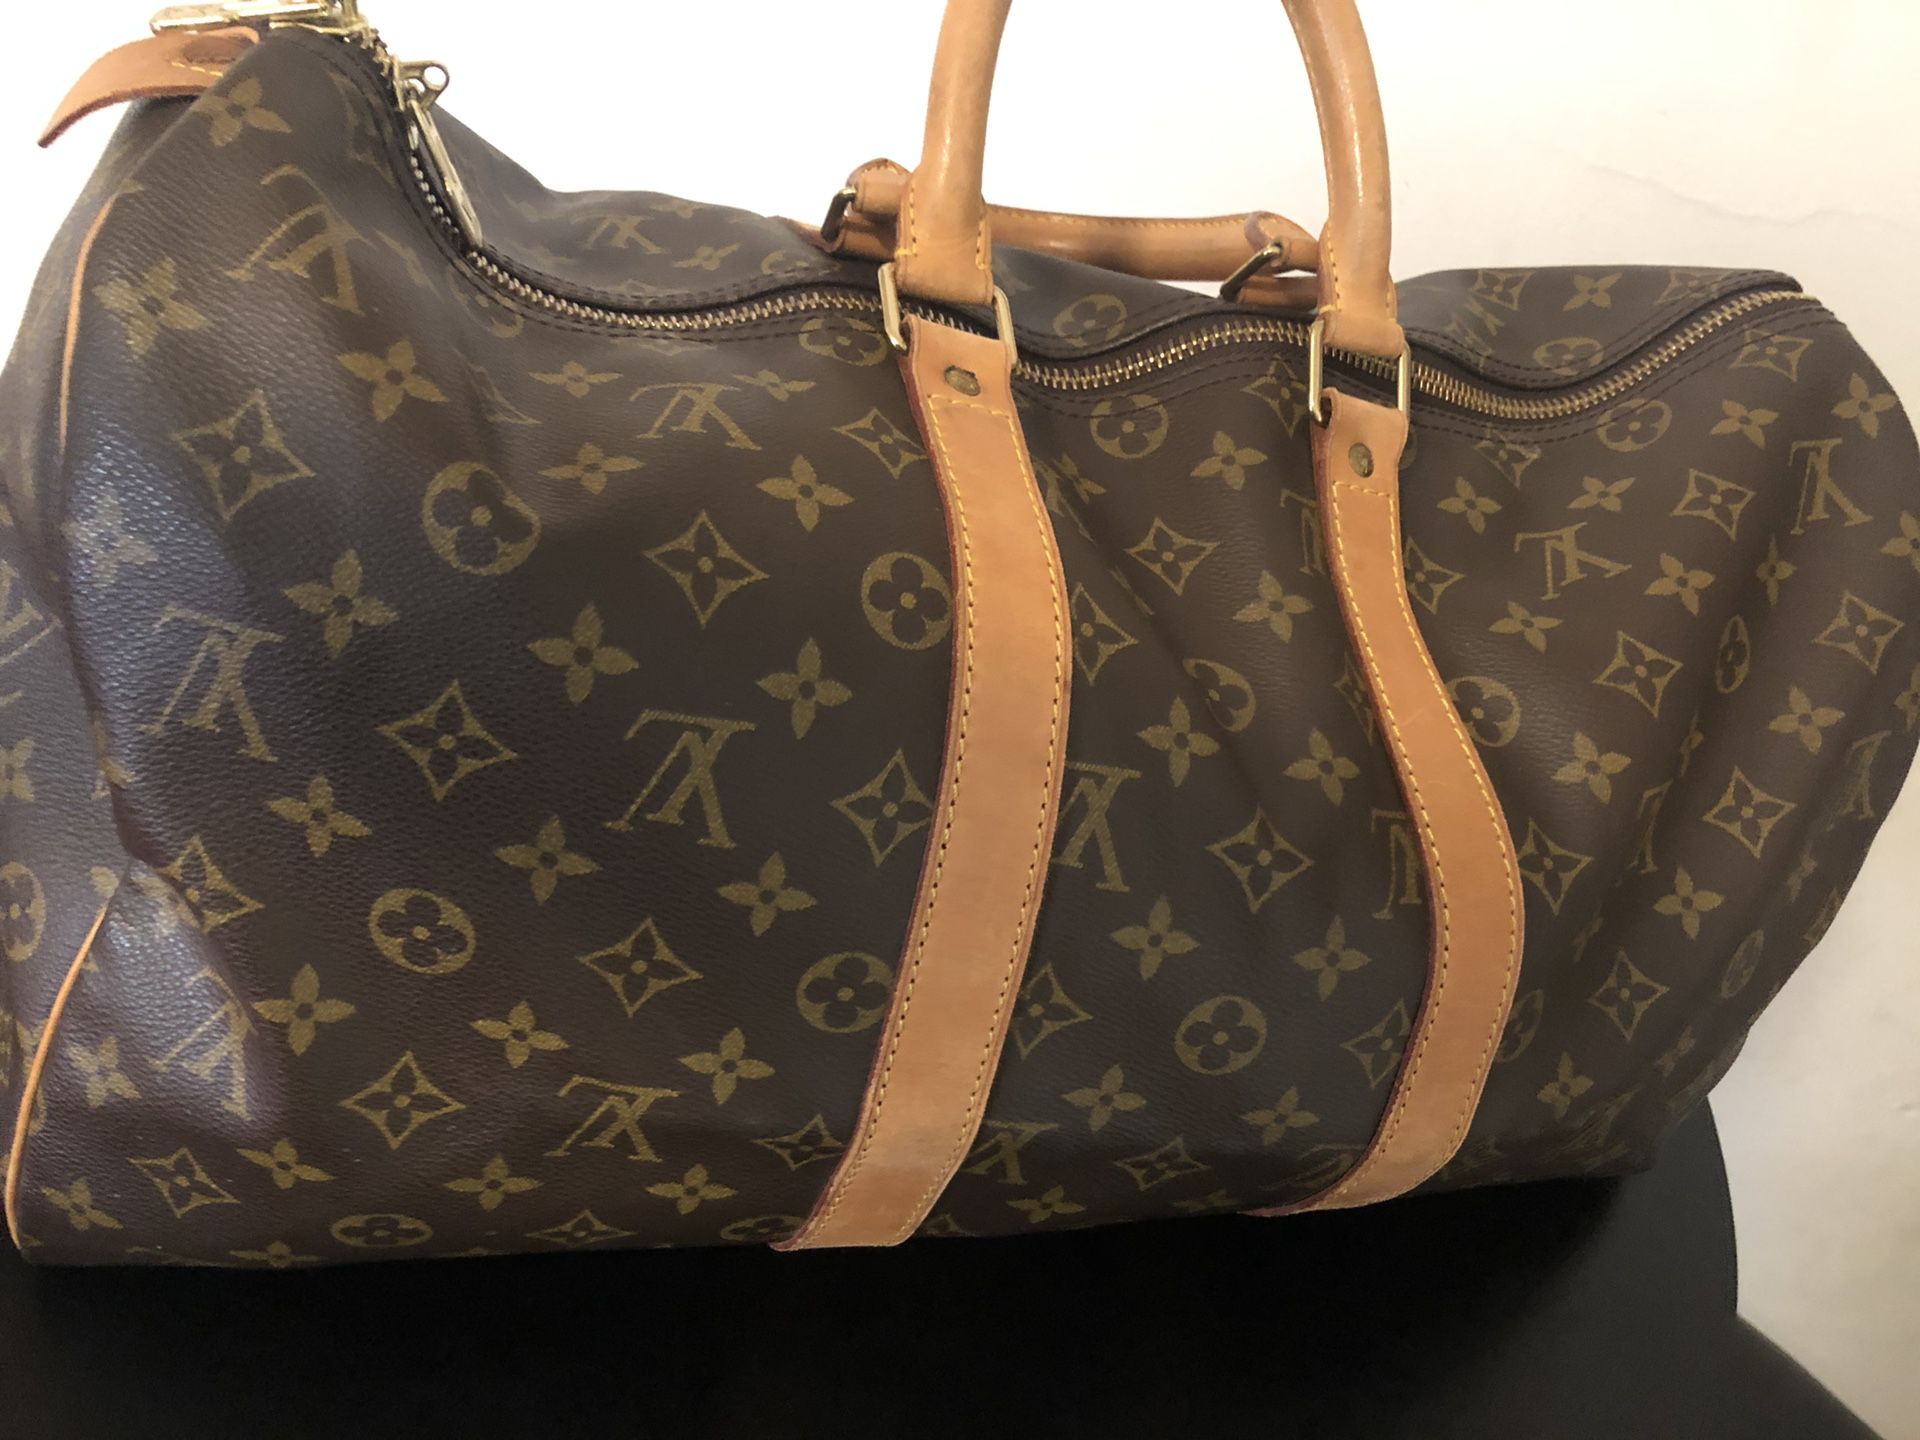 100% Authentic Louis Vuitton Travel Bag. Serial #: SP0943 Send me offers and Check my other listings